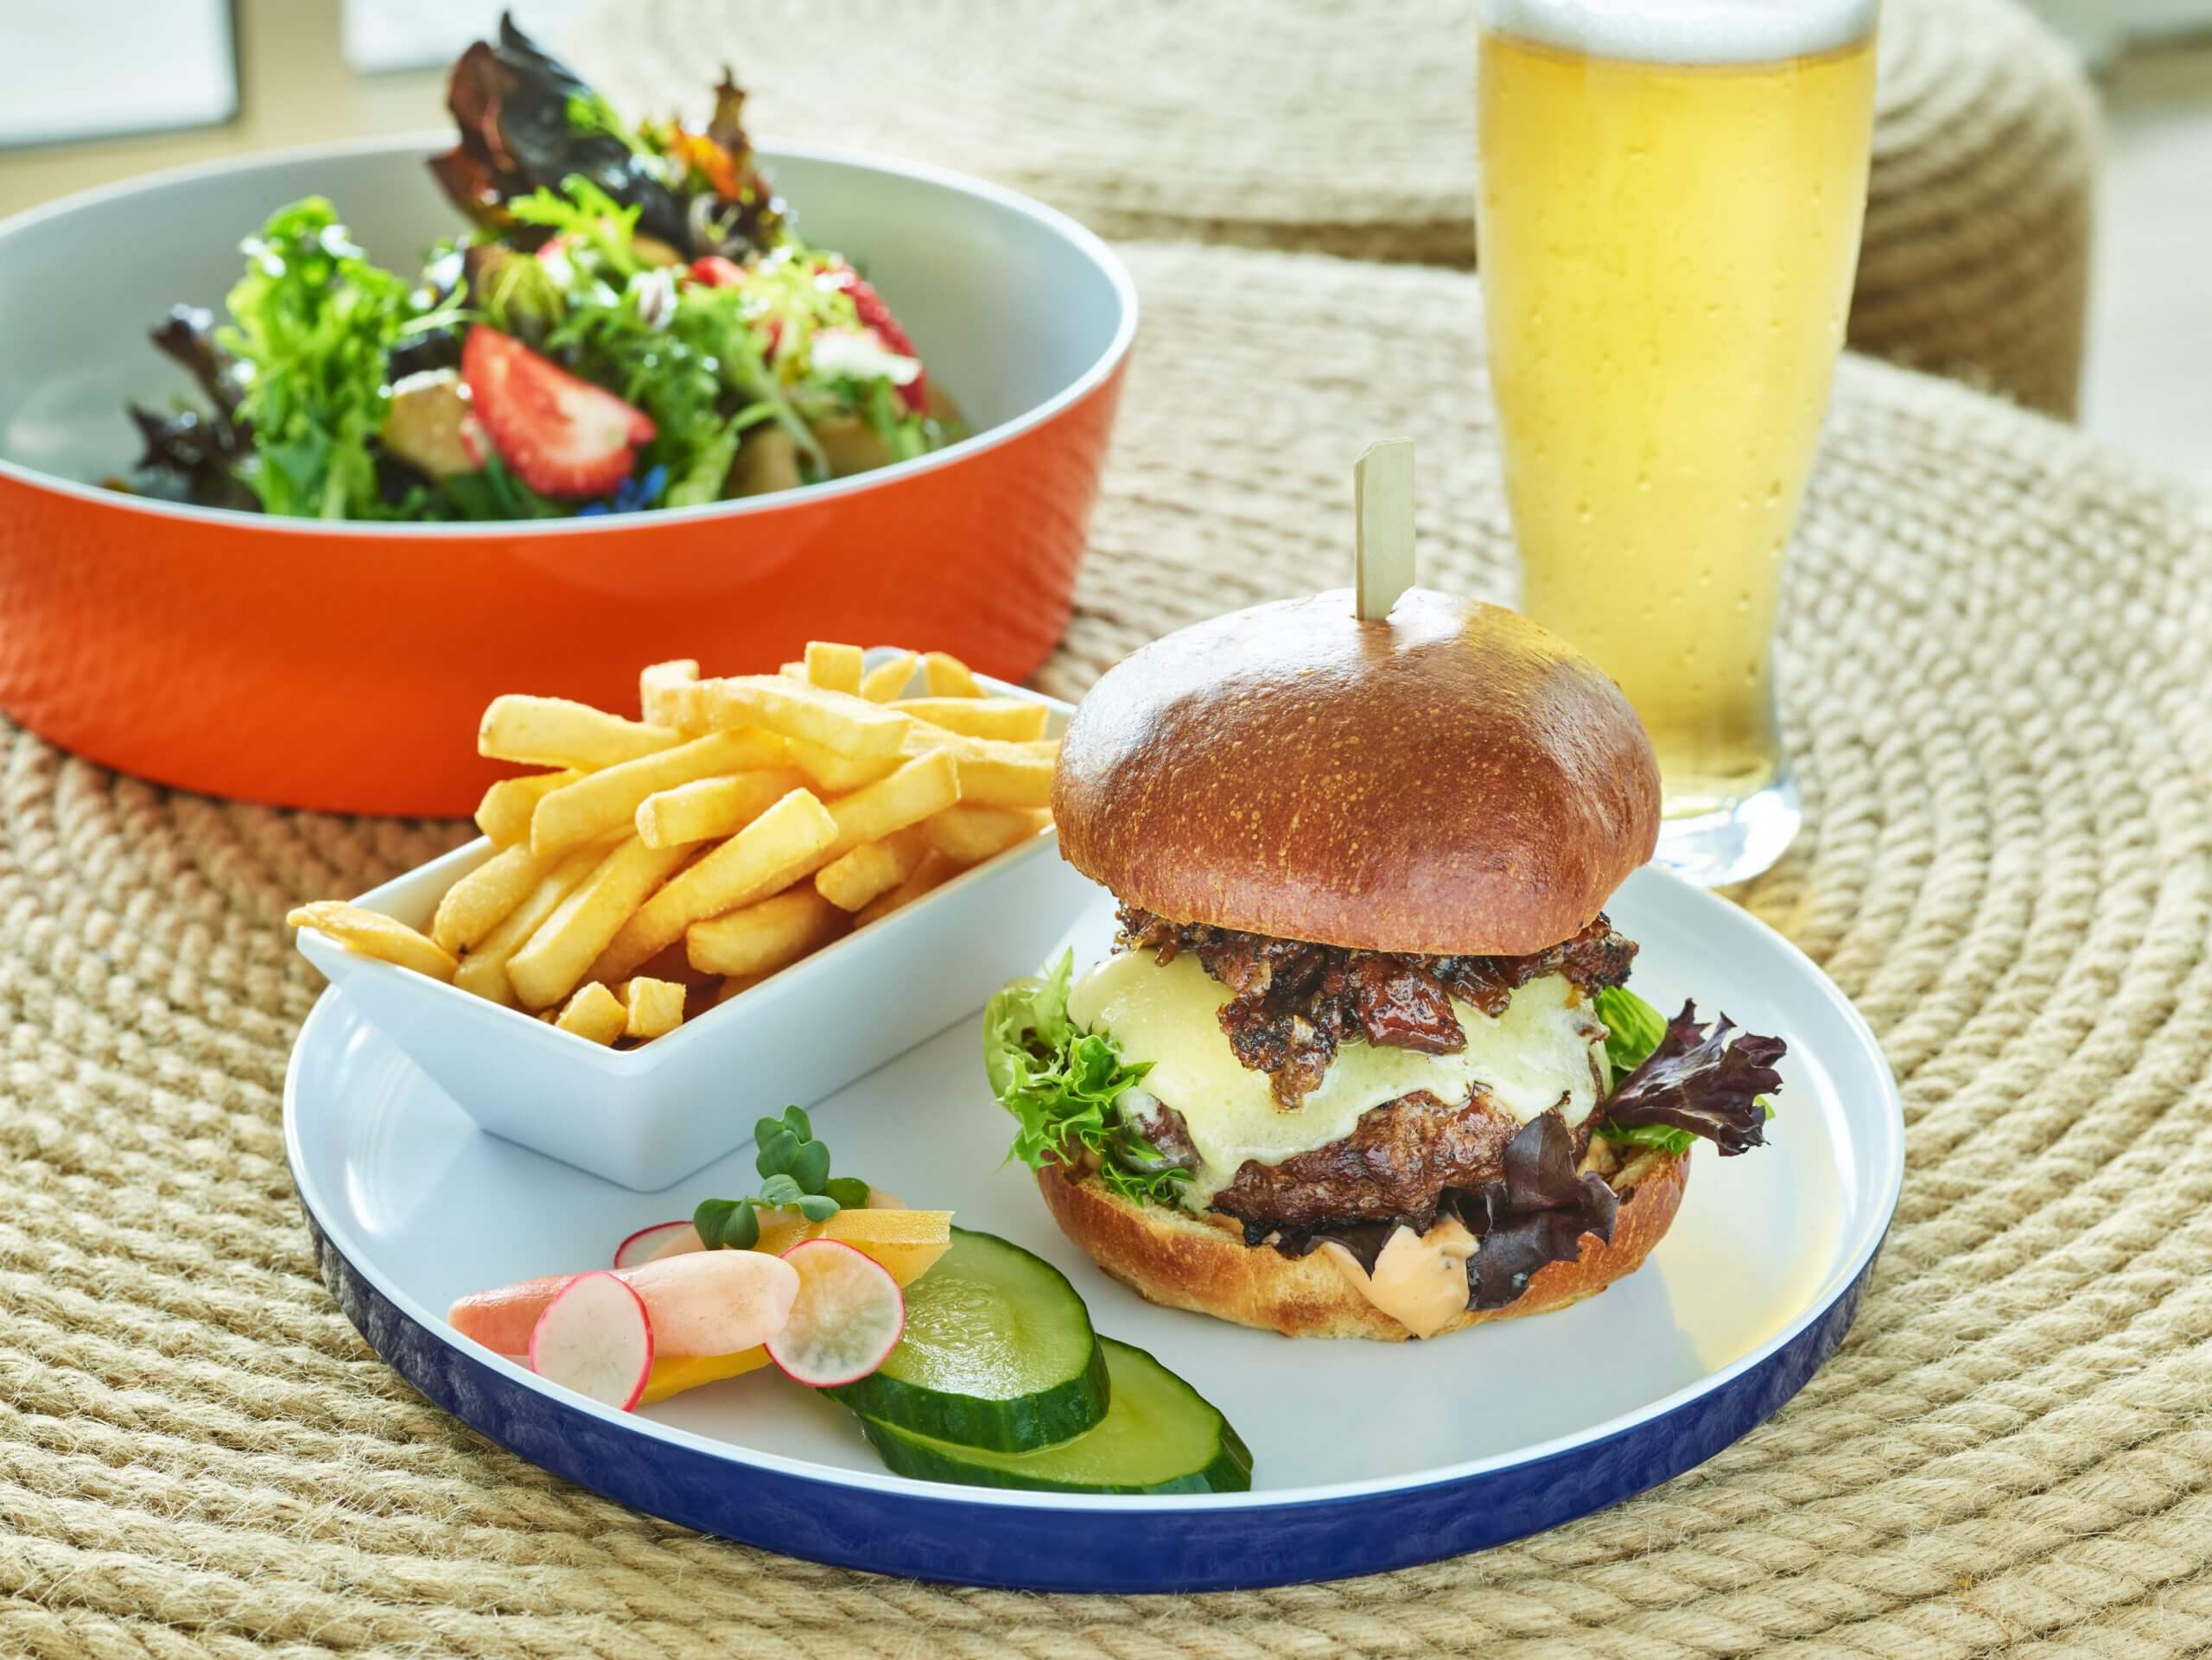 Burguer with fries salad and beer